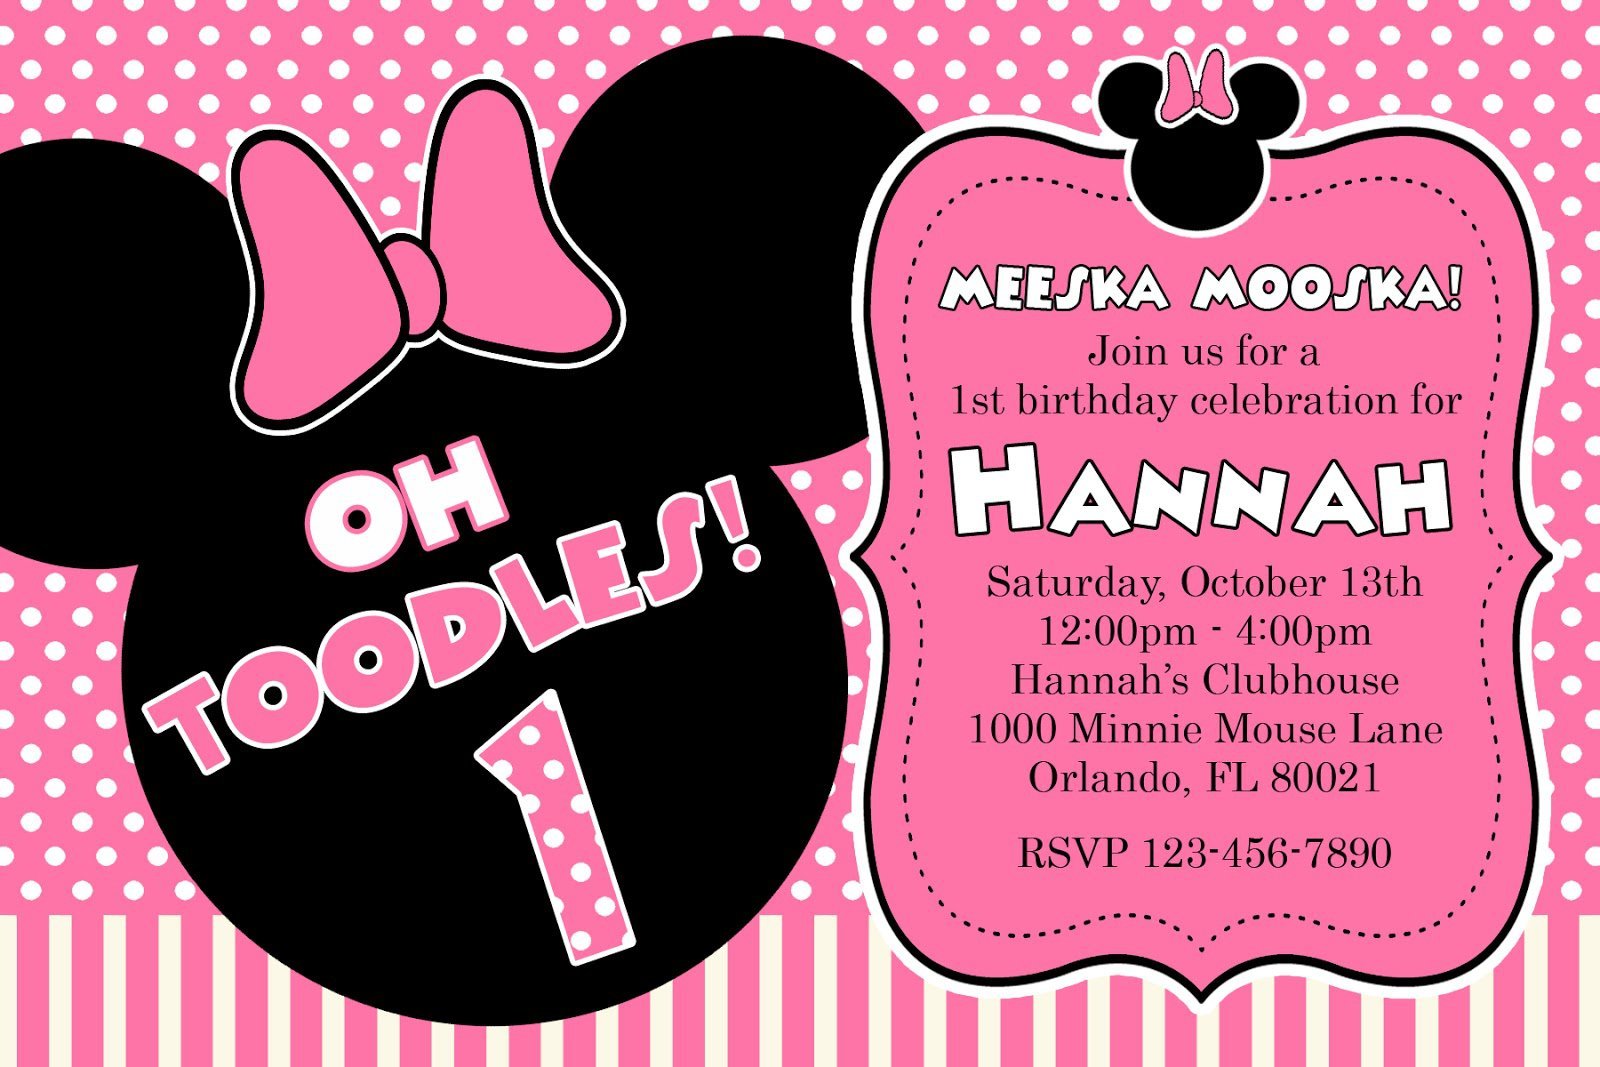 Baby Minnie Mouse Birthday Party Invitations